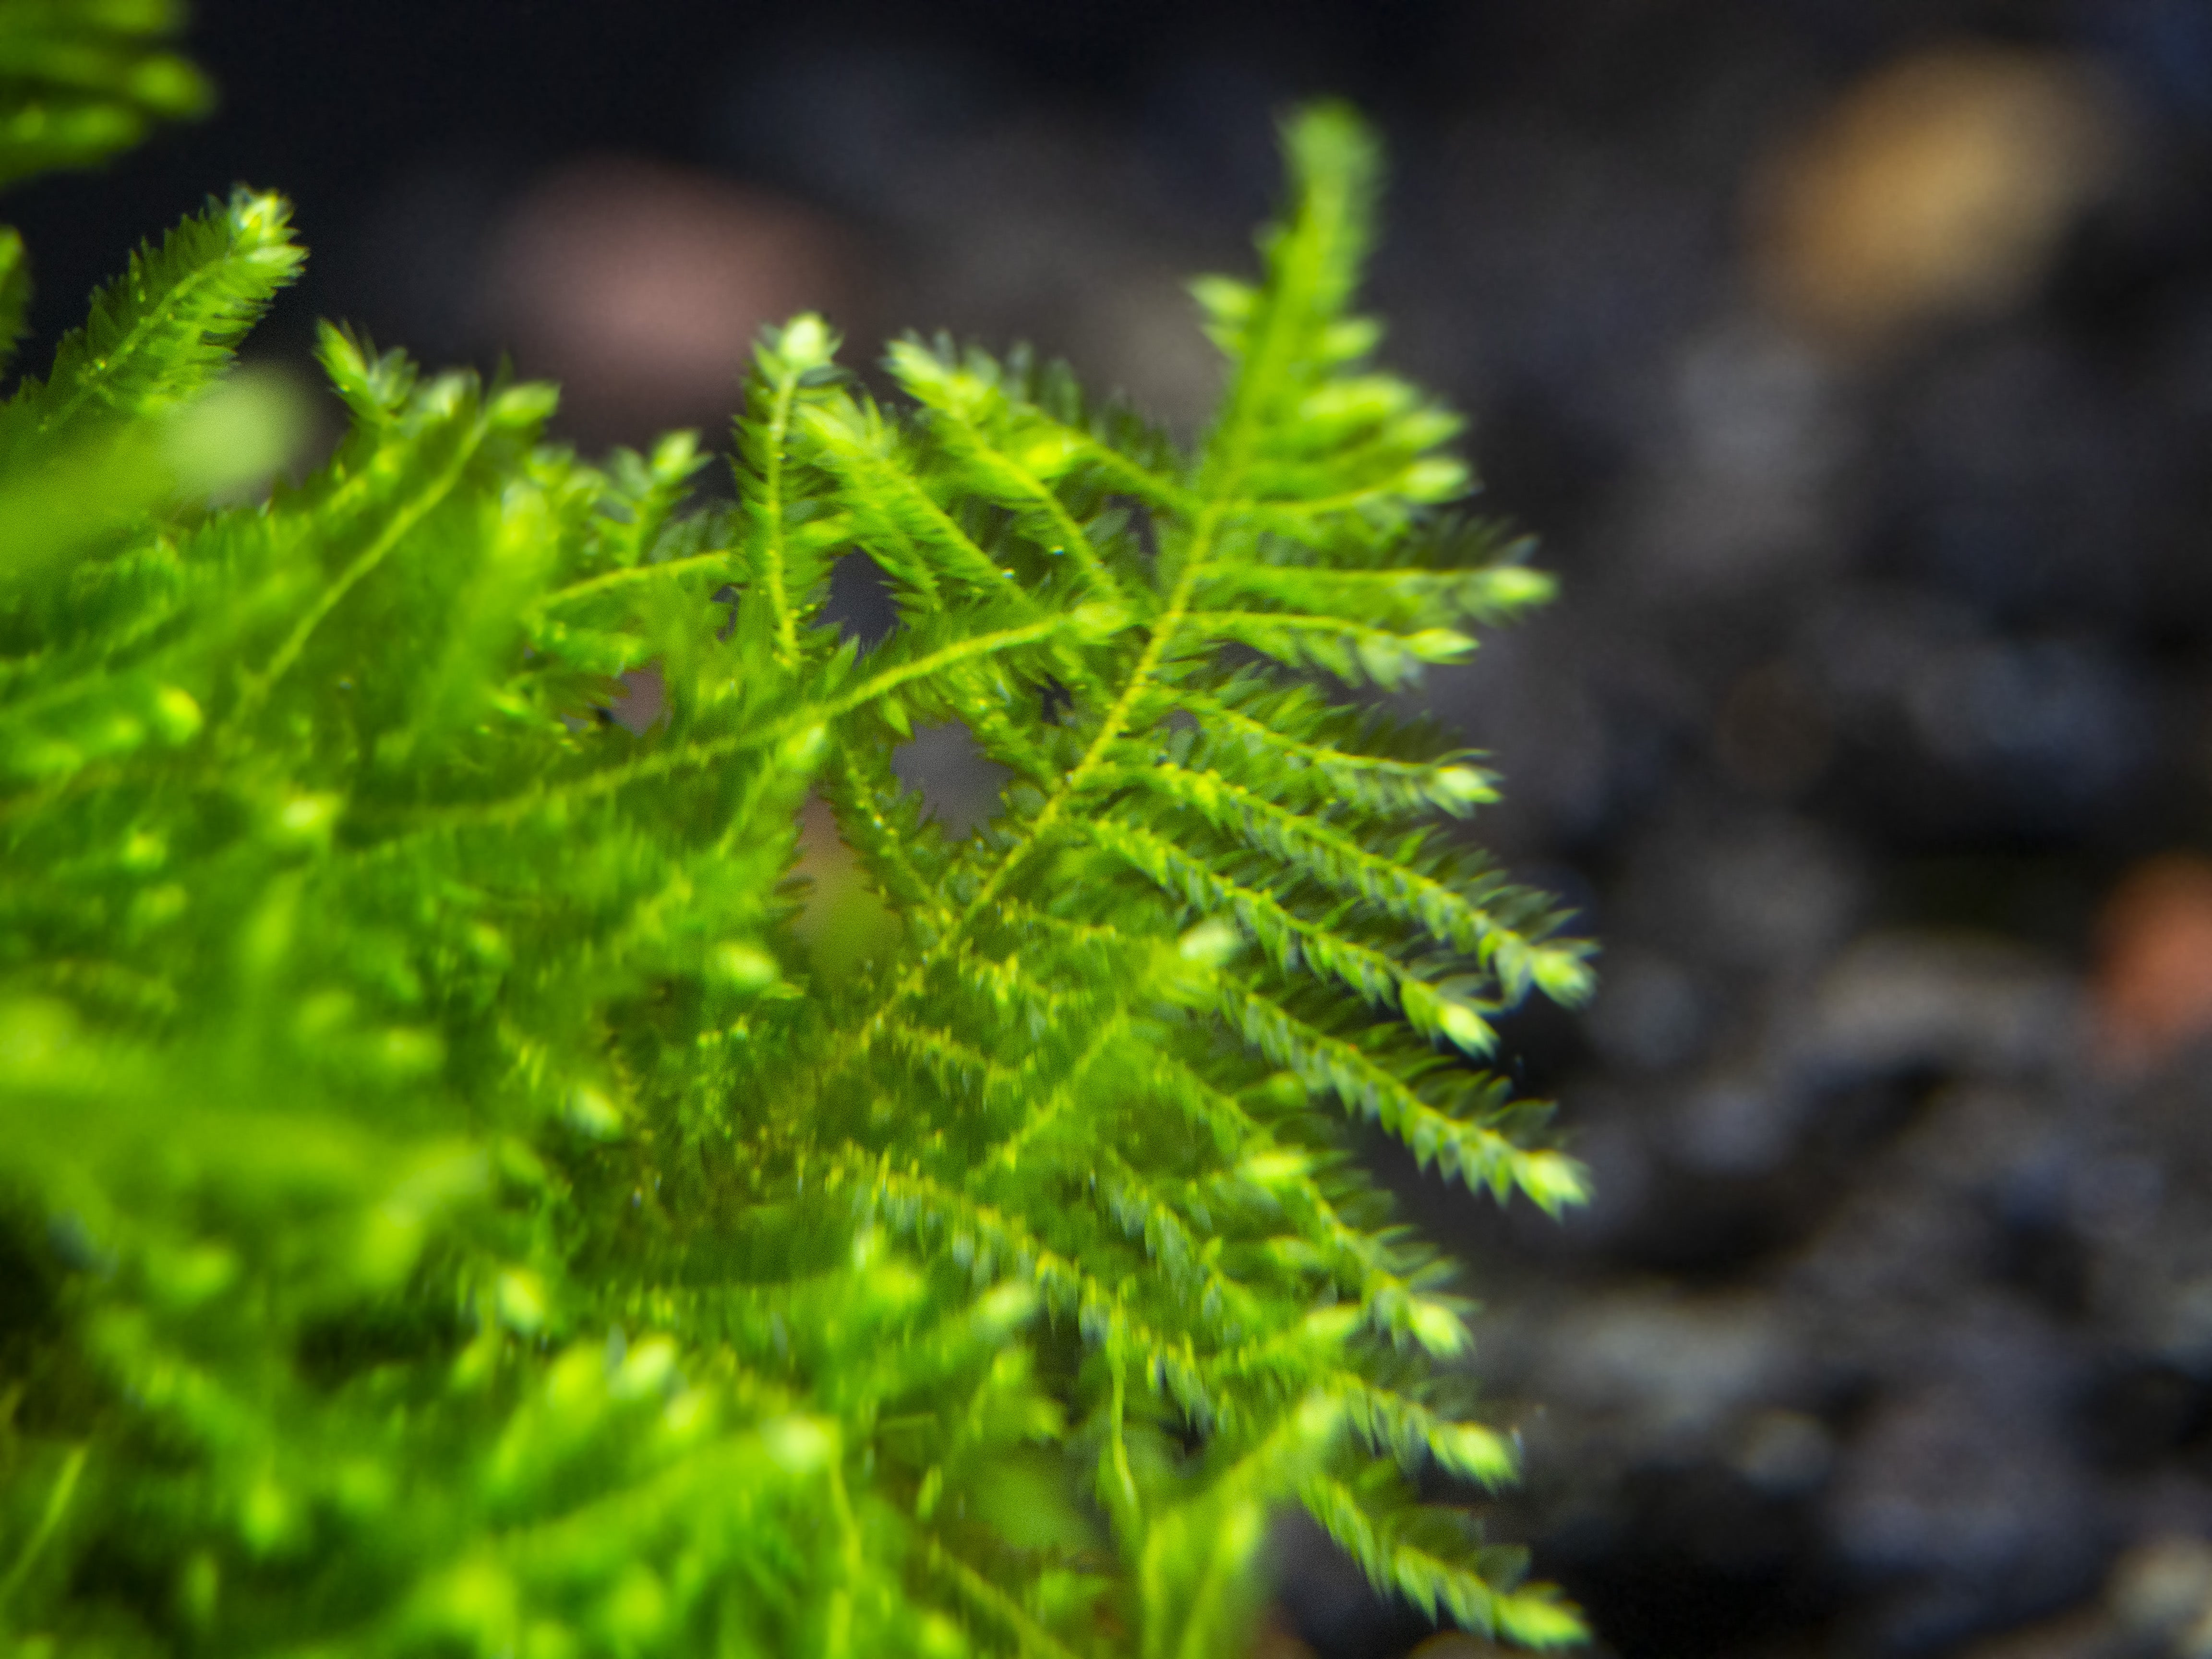 Christmas Moss (Vesicularia montagnei) Tissue Culture - Aquatic Arts on  sale today for $ 13.99